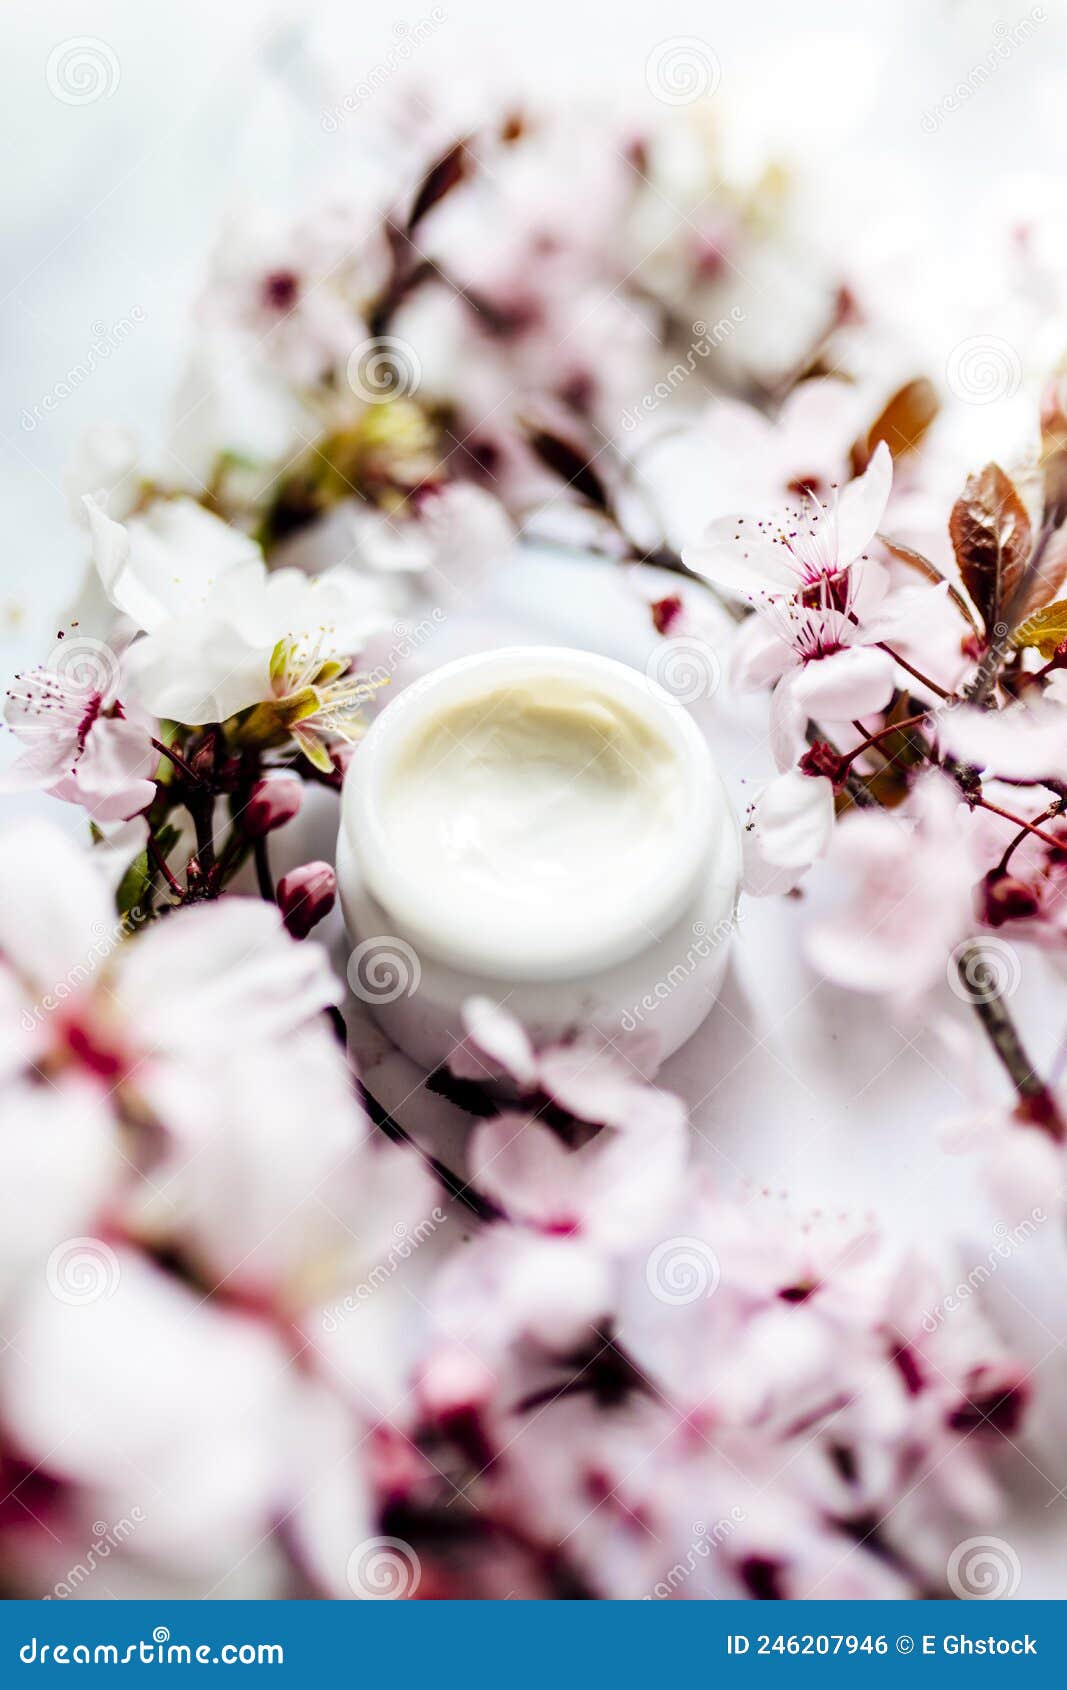 op view of cosmetic cream with pink cherry flowers in a blue glass jar. hygienic skincare lotion product.idioma de palabras